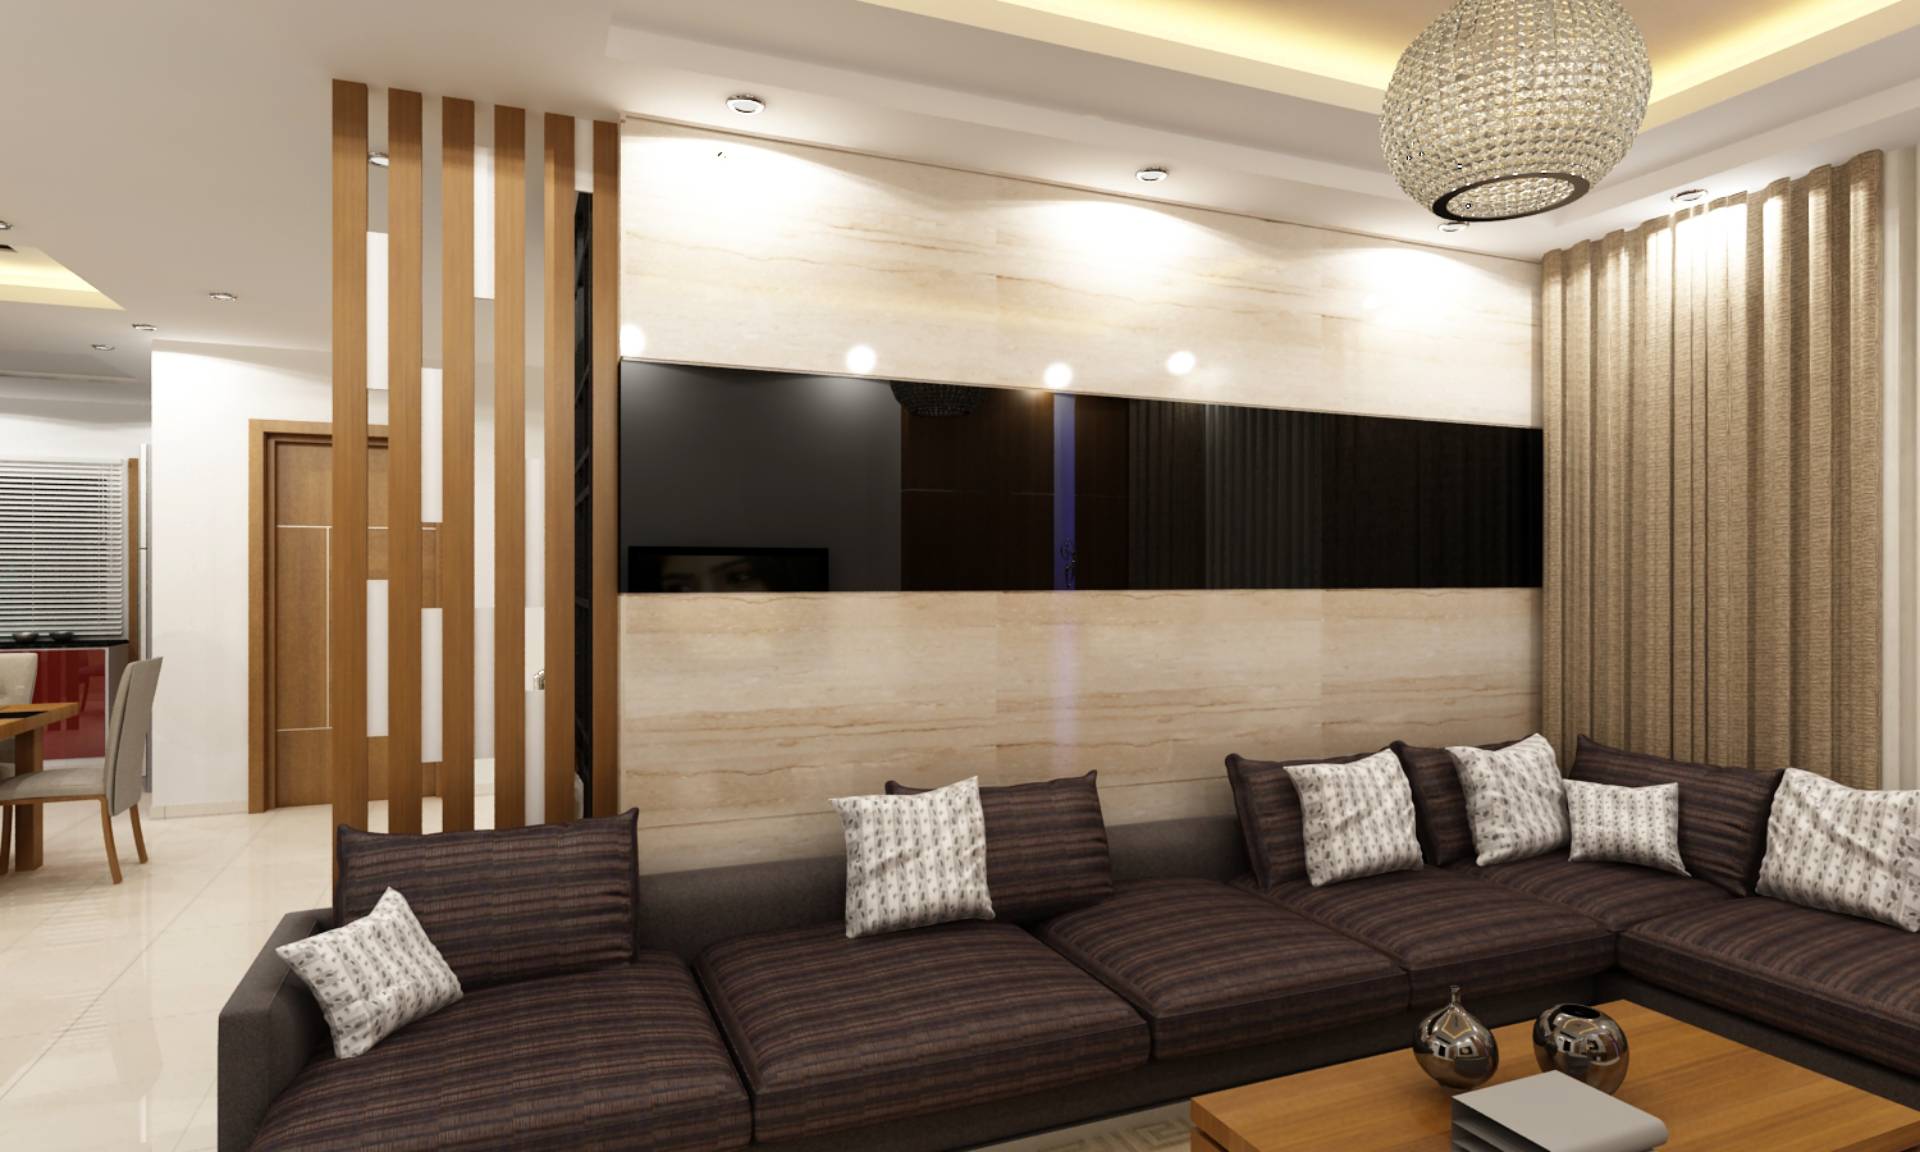 Commercial interior fit-out designs